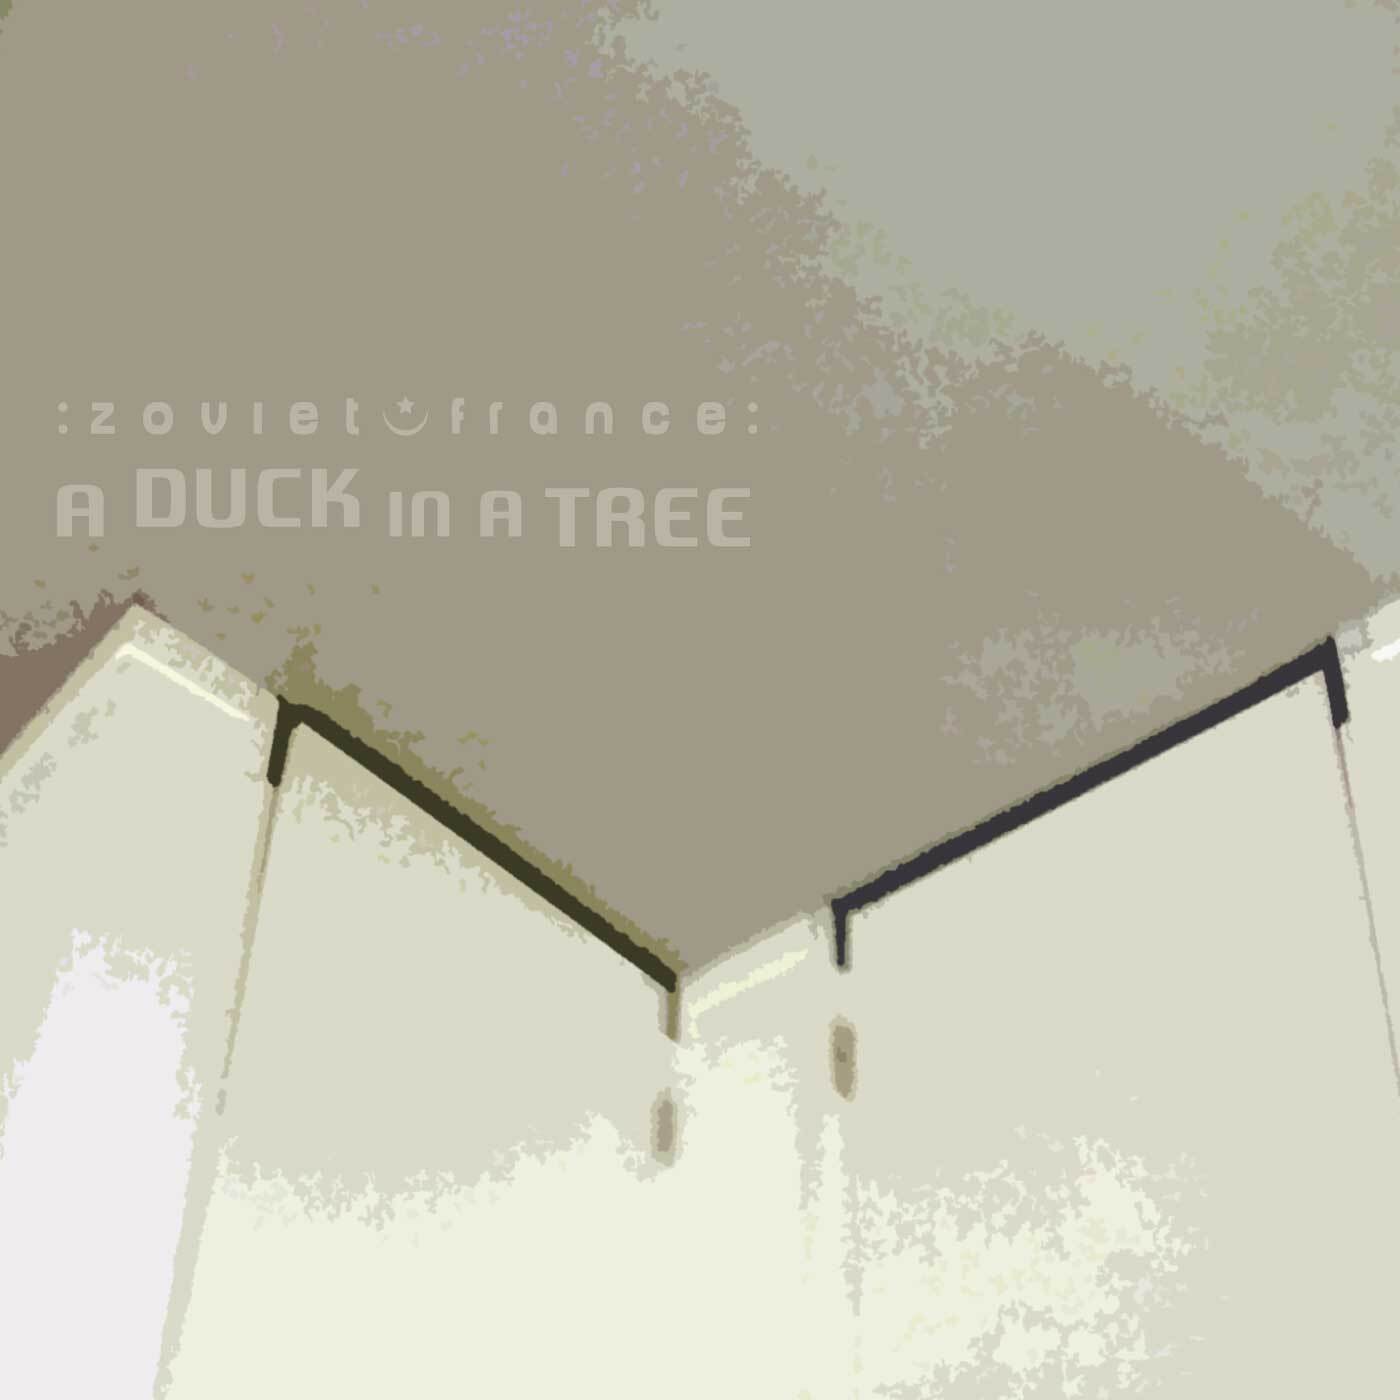 A-Duck-in-a-Tree-2014-08-30-_-13-Days-of